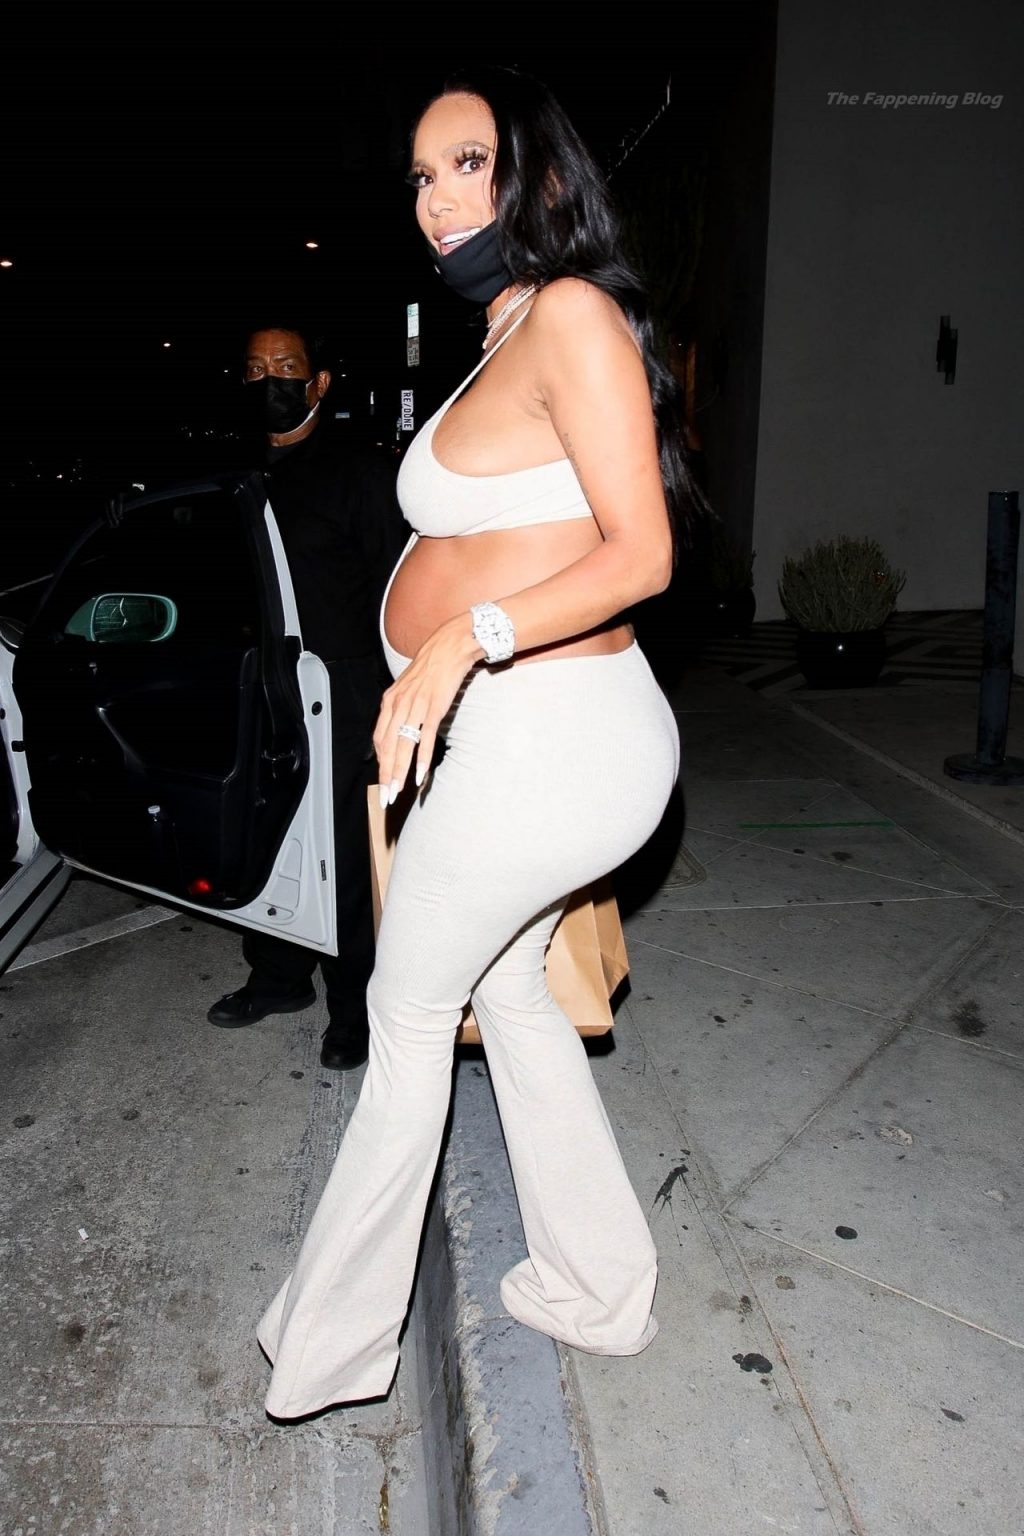 Erica Mena Flaunts Her Pregnant Boobs in a Revealing Outfit at Catch LA (29 Photos)